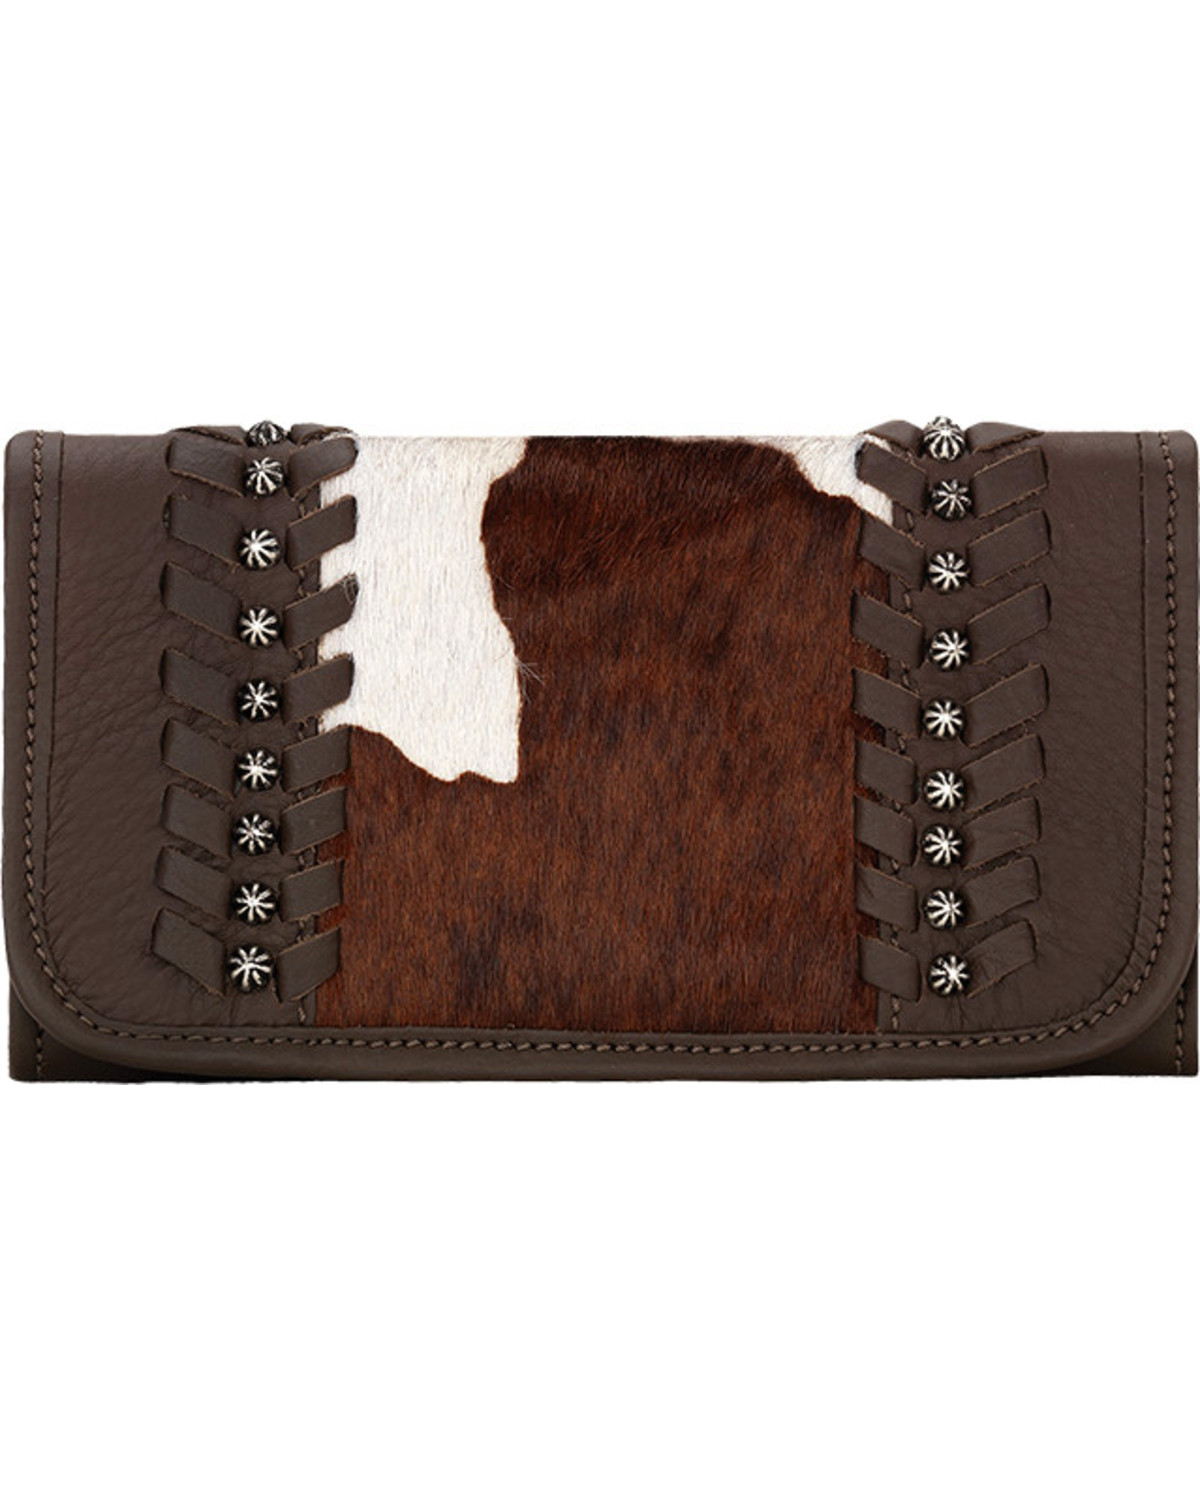 American West Women's Cow Town Pony Hair Tri-Fold Wallet